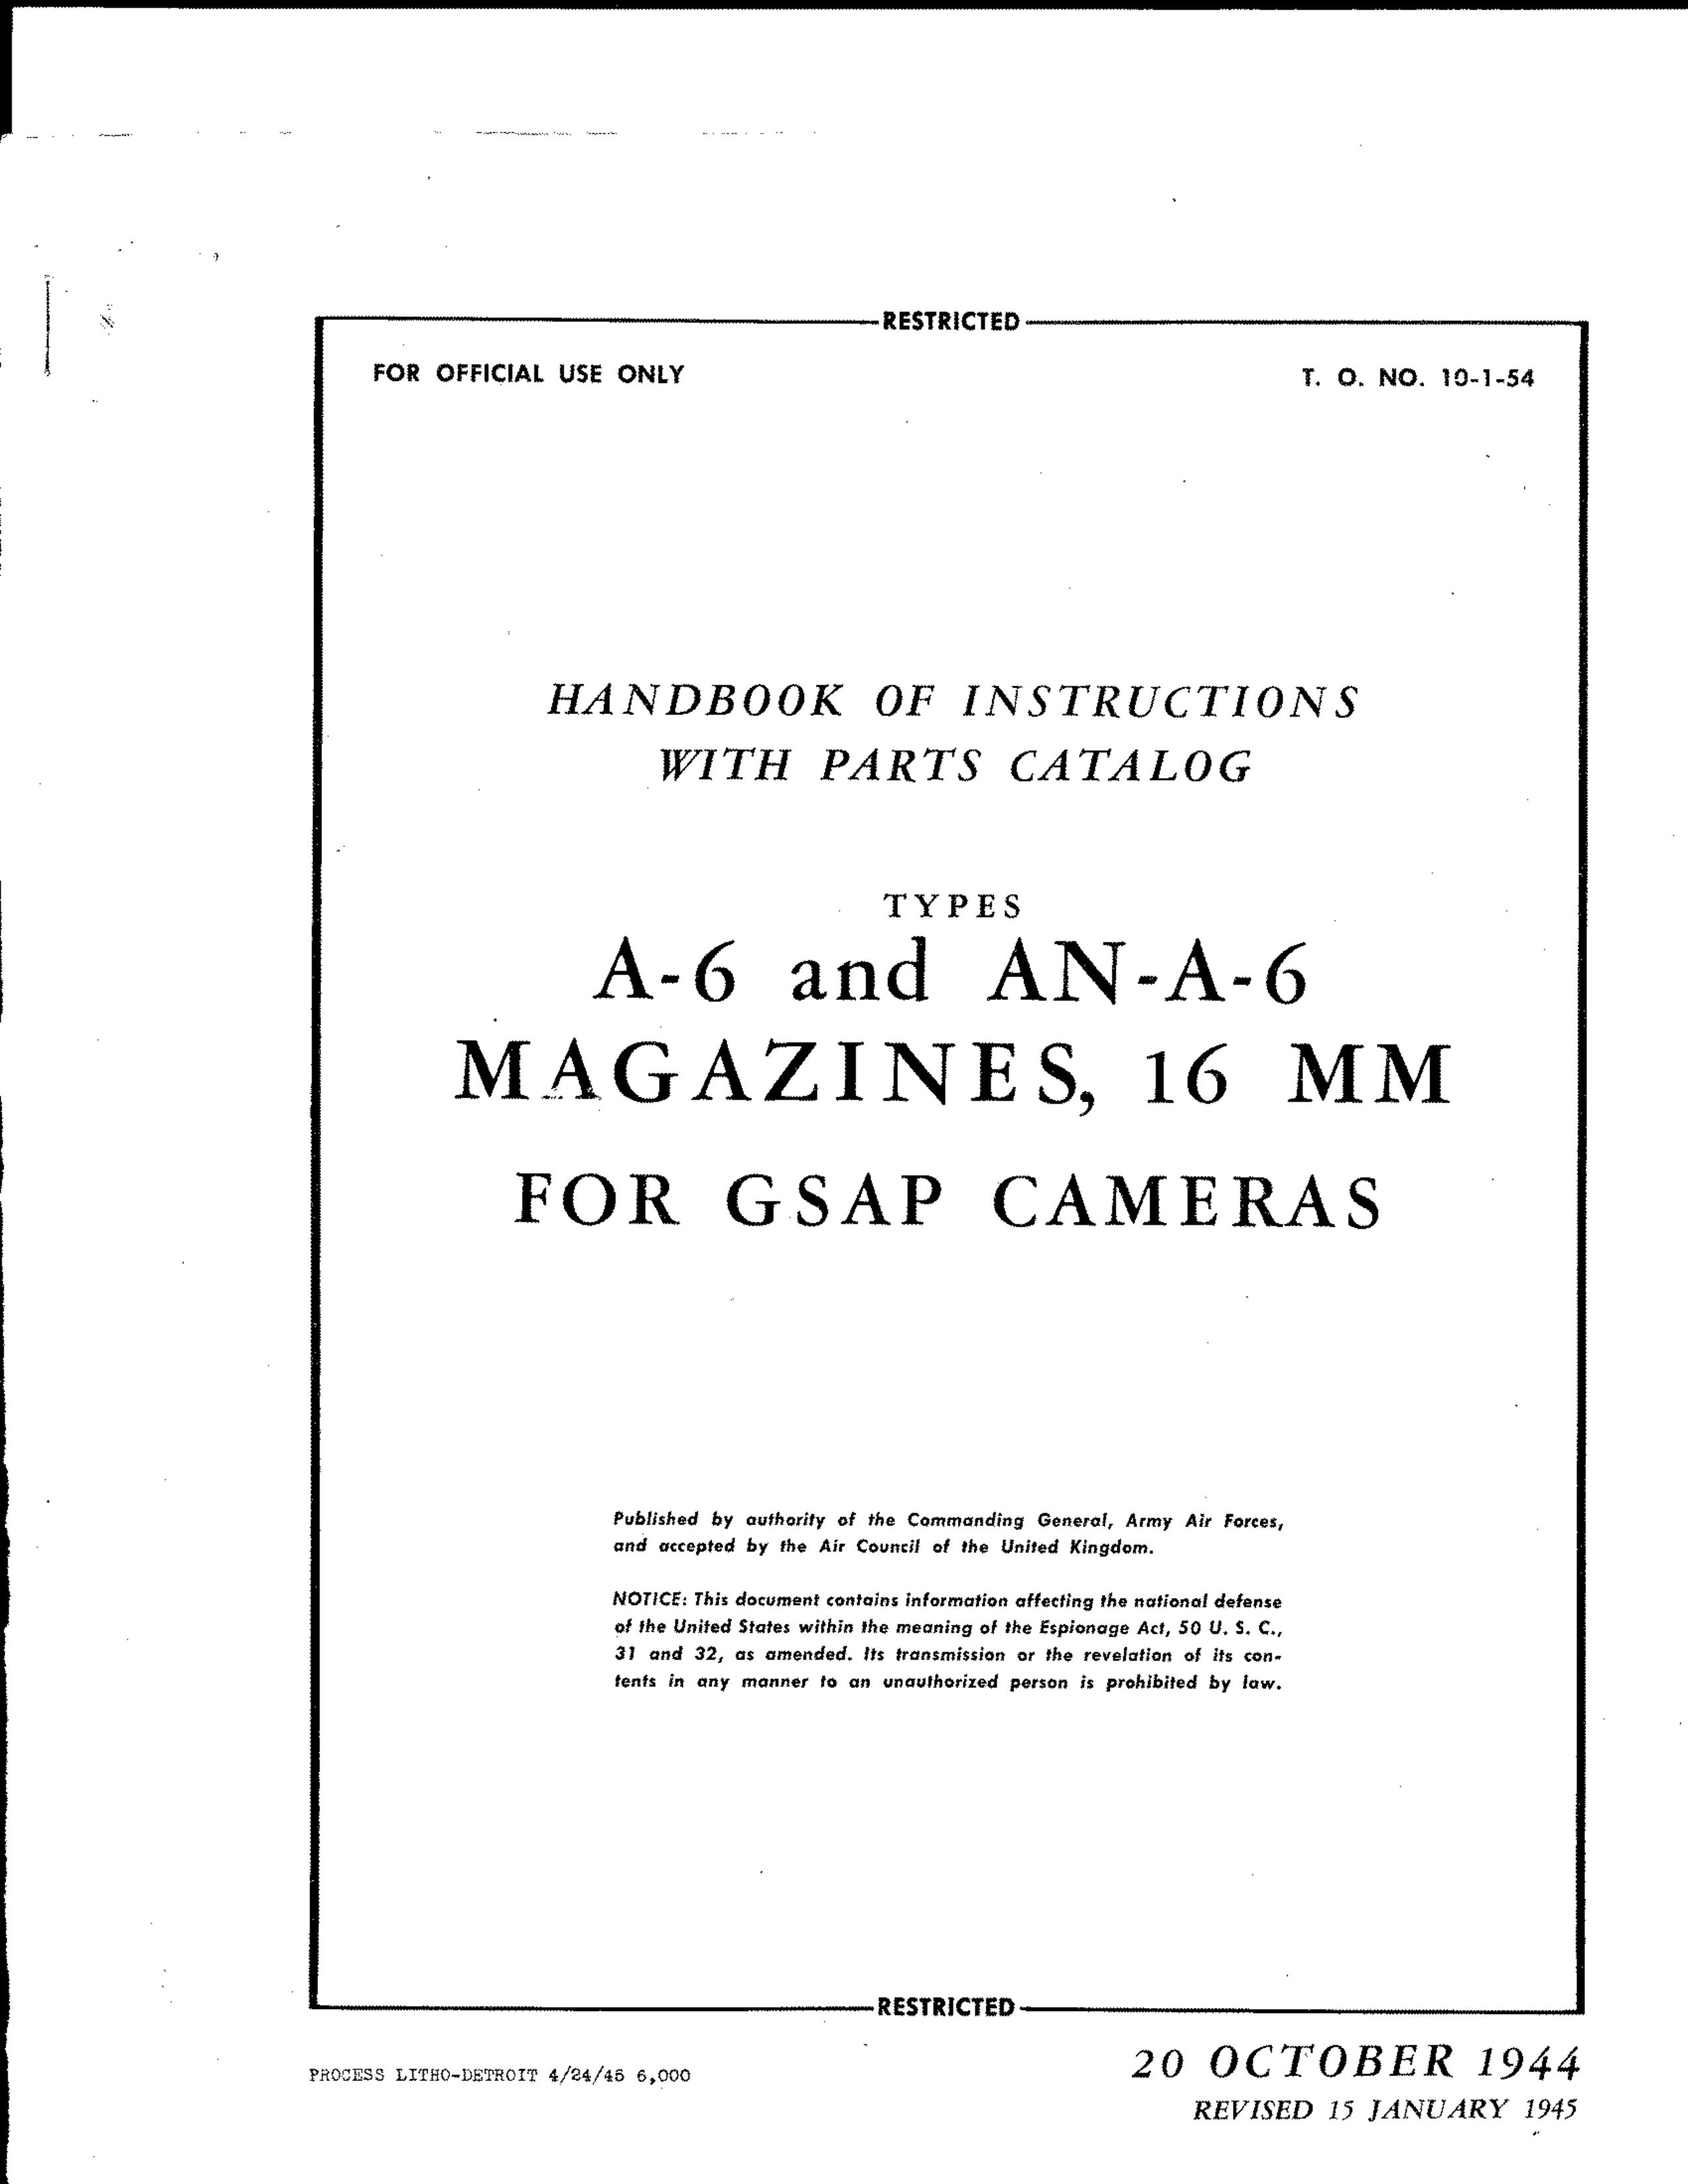 Sample page 1 from AirCorps Library document: Handbook for A-6 & AN-A-6 Magazines for 16MM GSAP Cameras